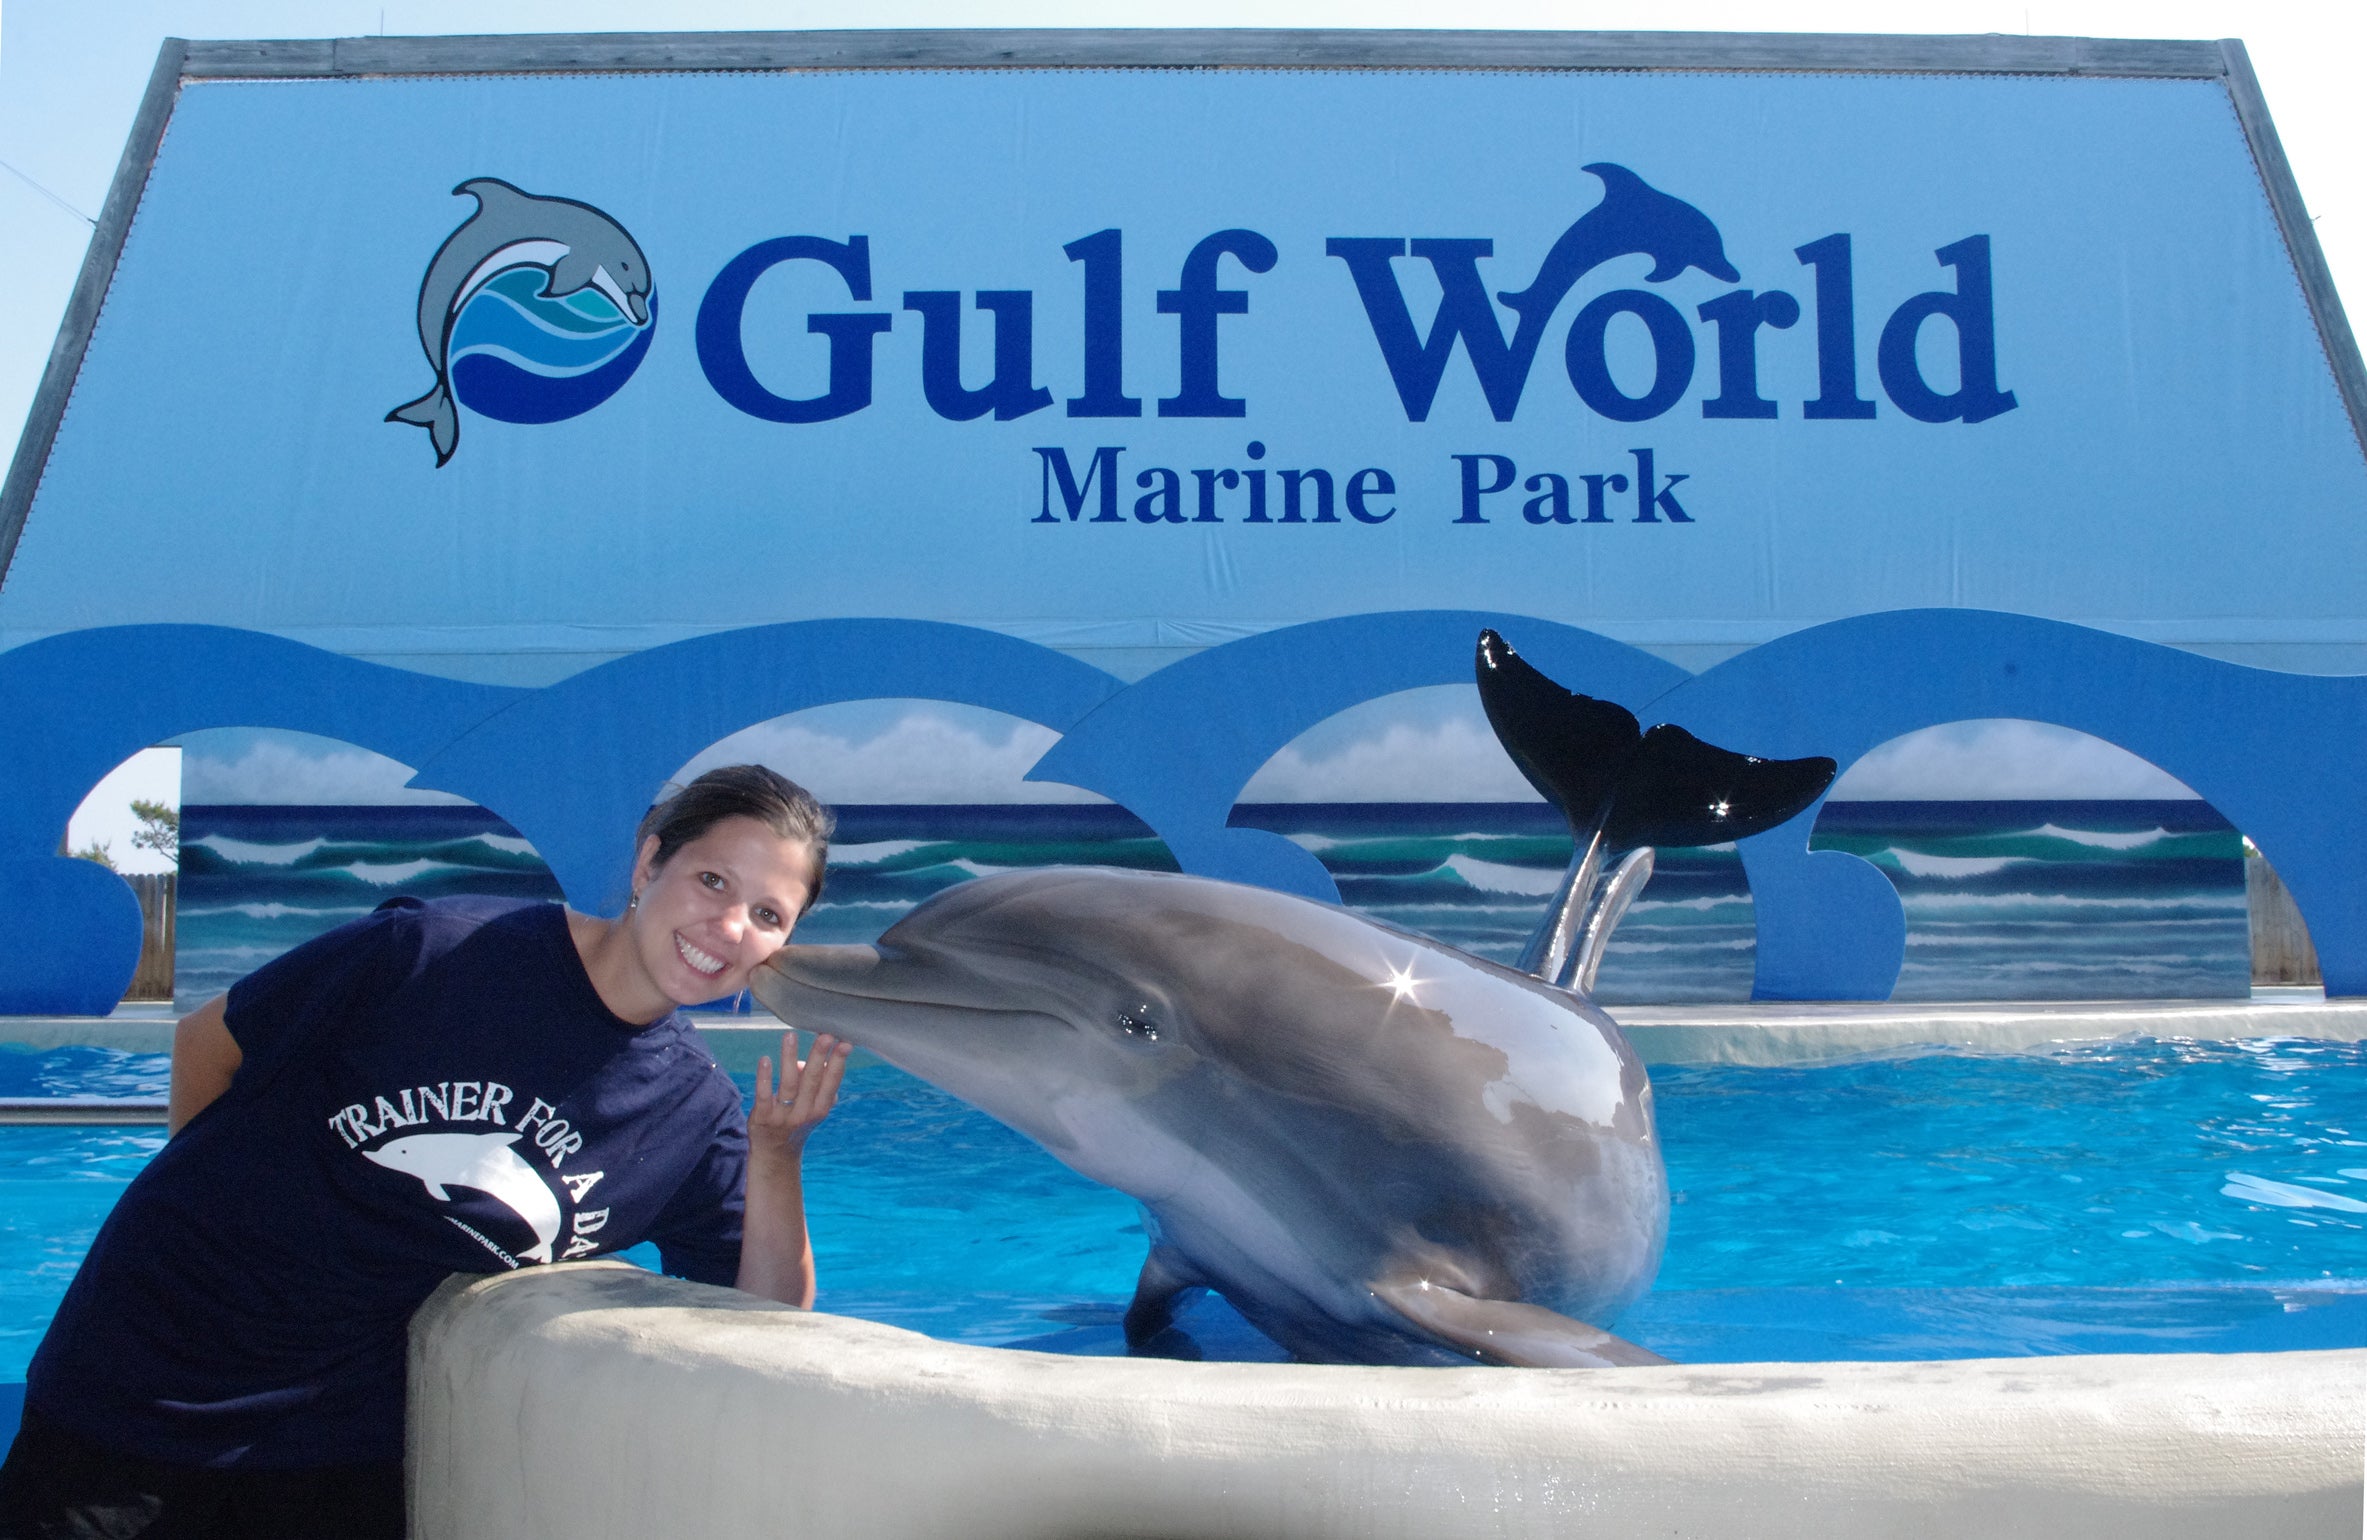 Check out Gulf World Marine Park nearby